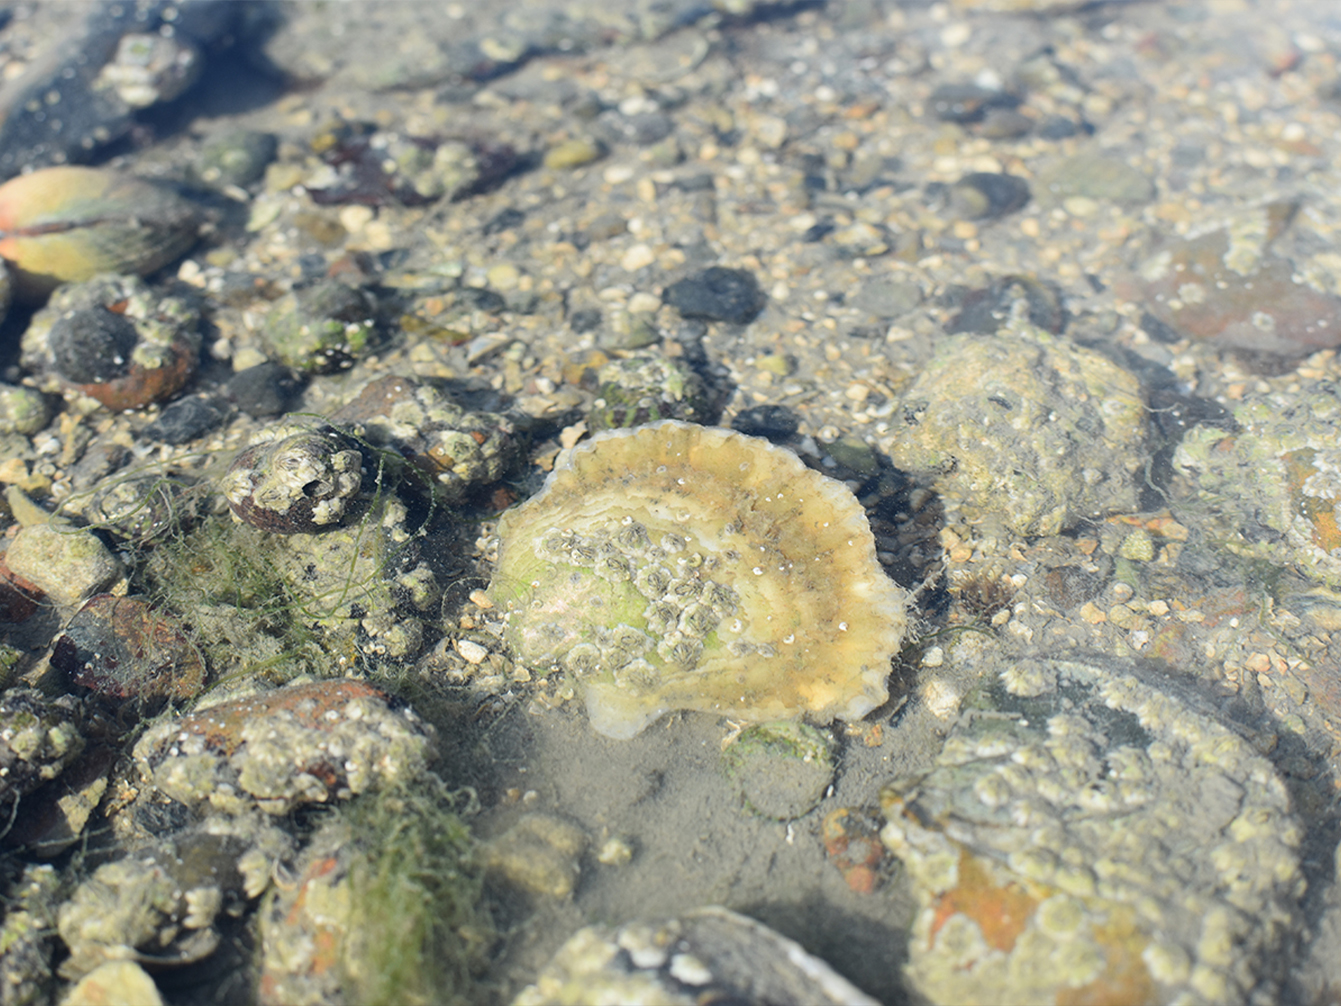 Native oyster intertidal rockpool